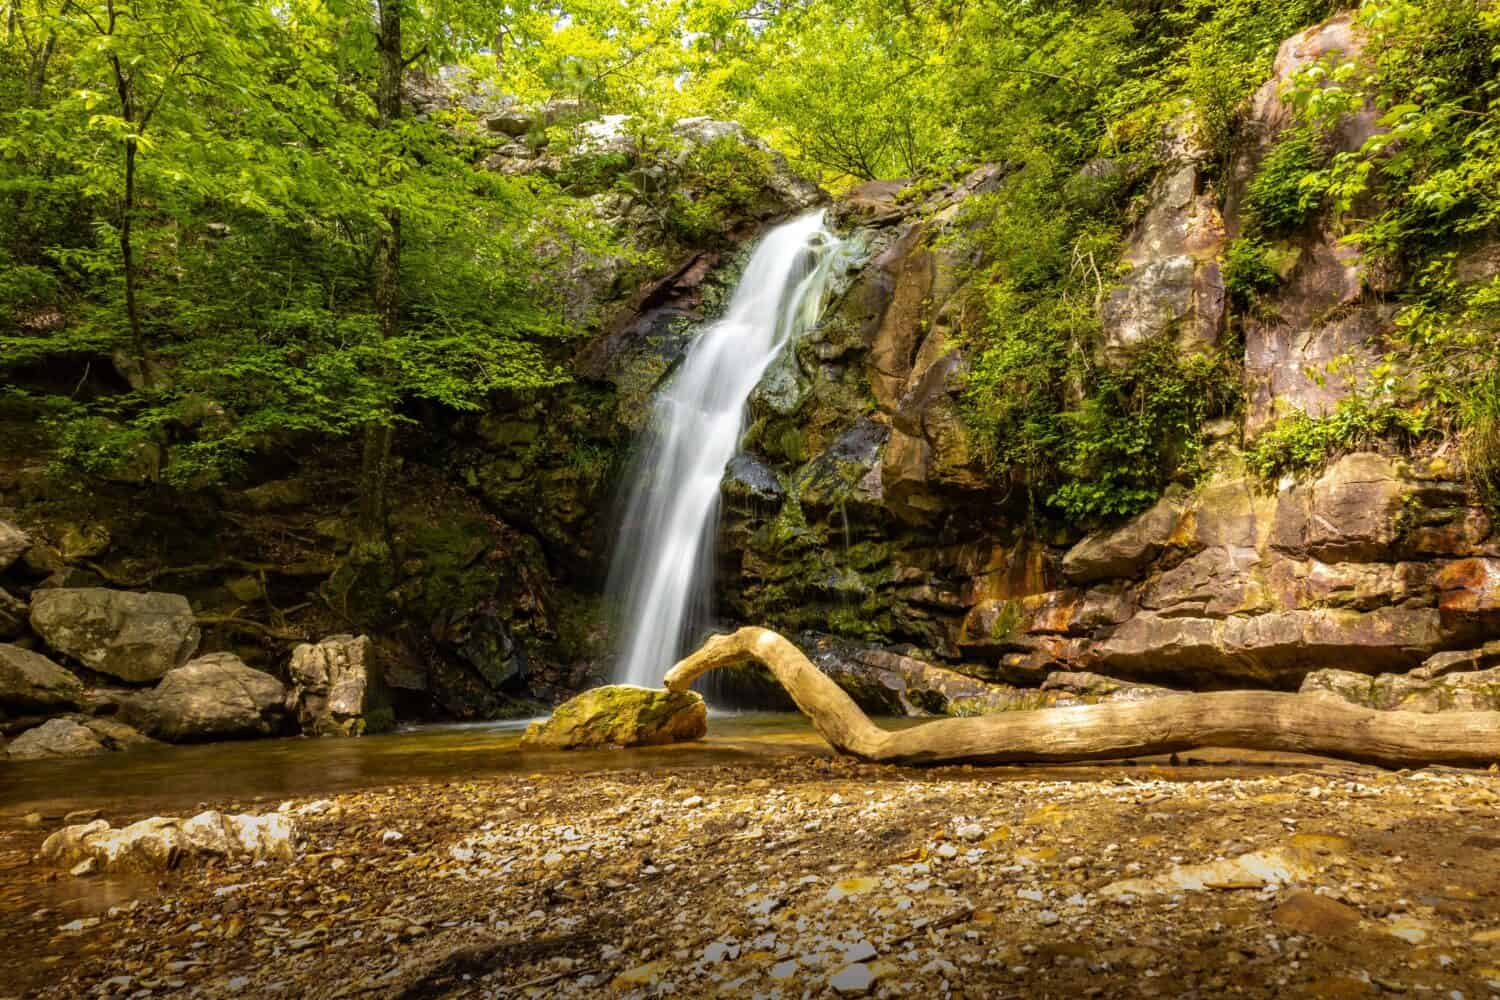 A mesmerizing view of the Peavine Falls in Oak Mountain State Park